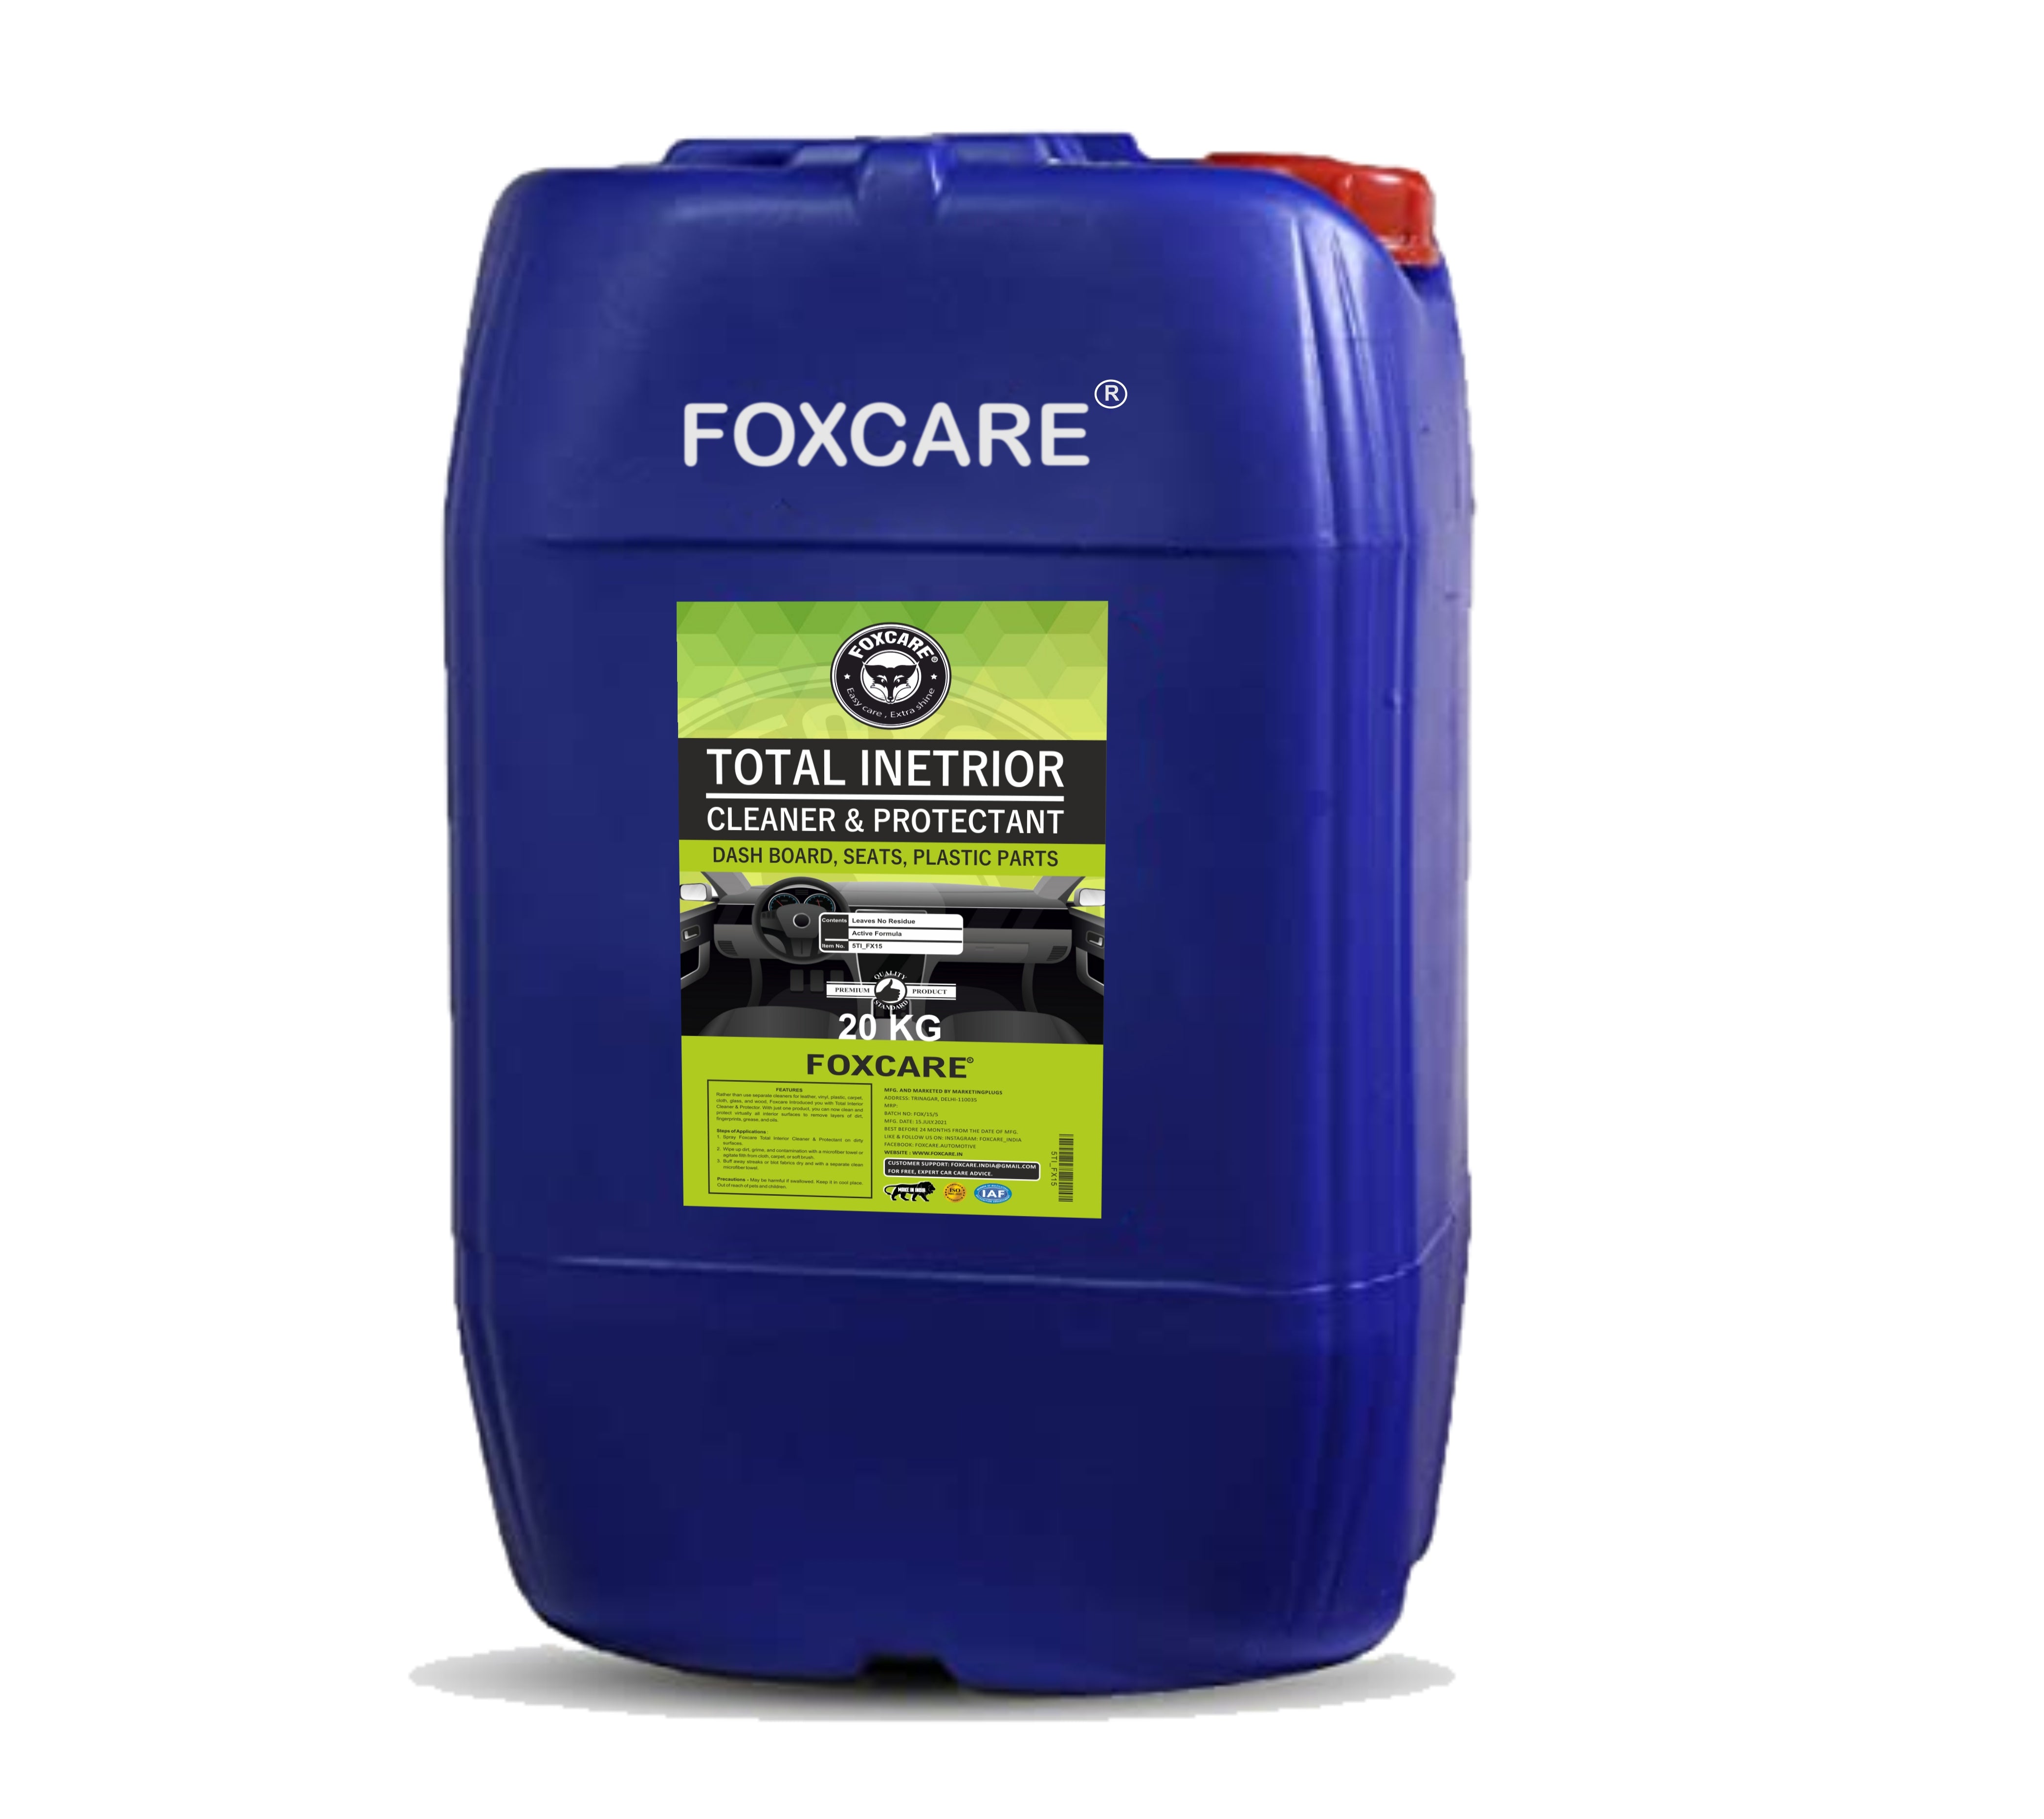 Foxcare Total Interior Cleaner & Protectant  (20 kg)